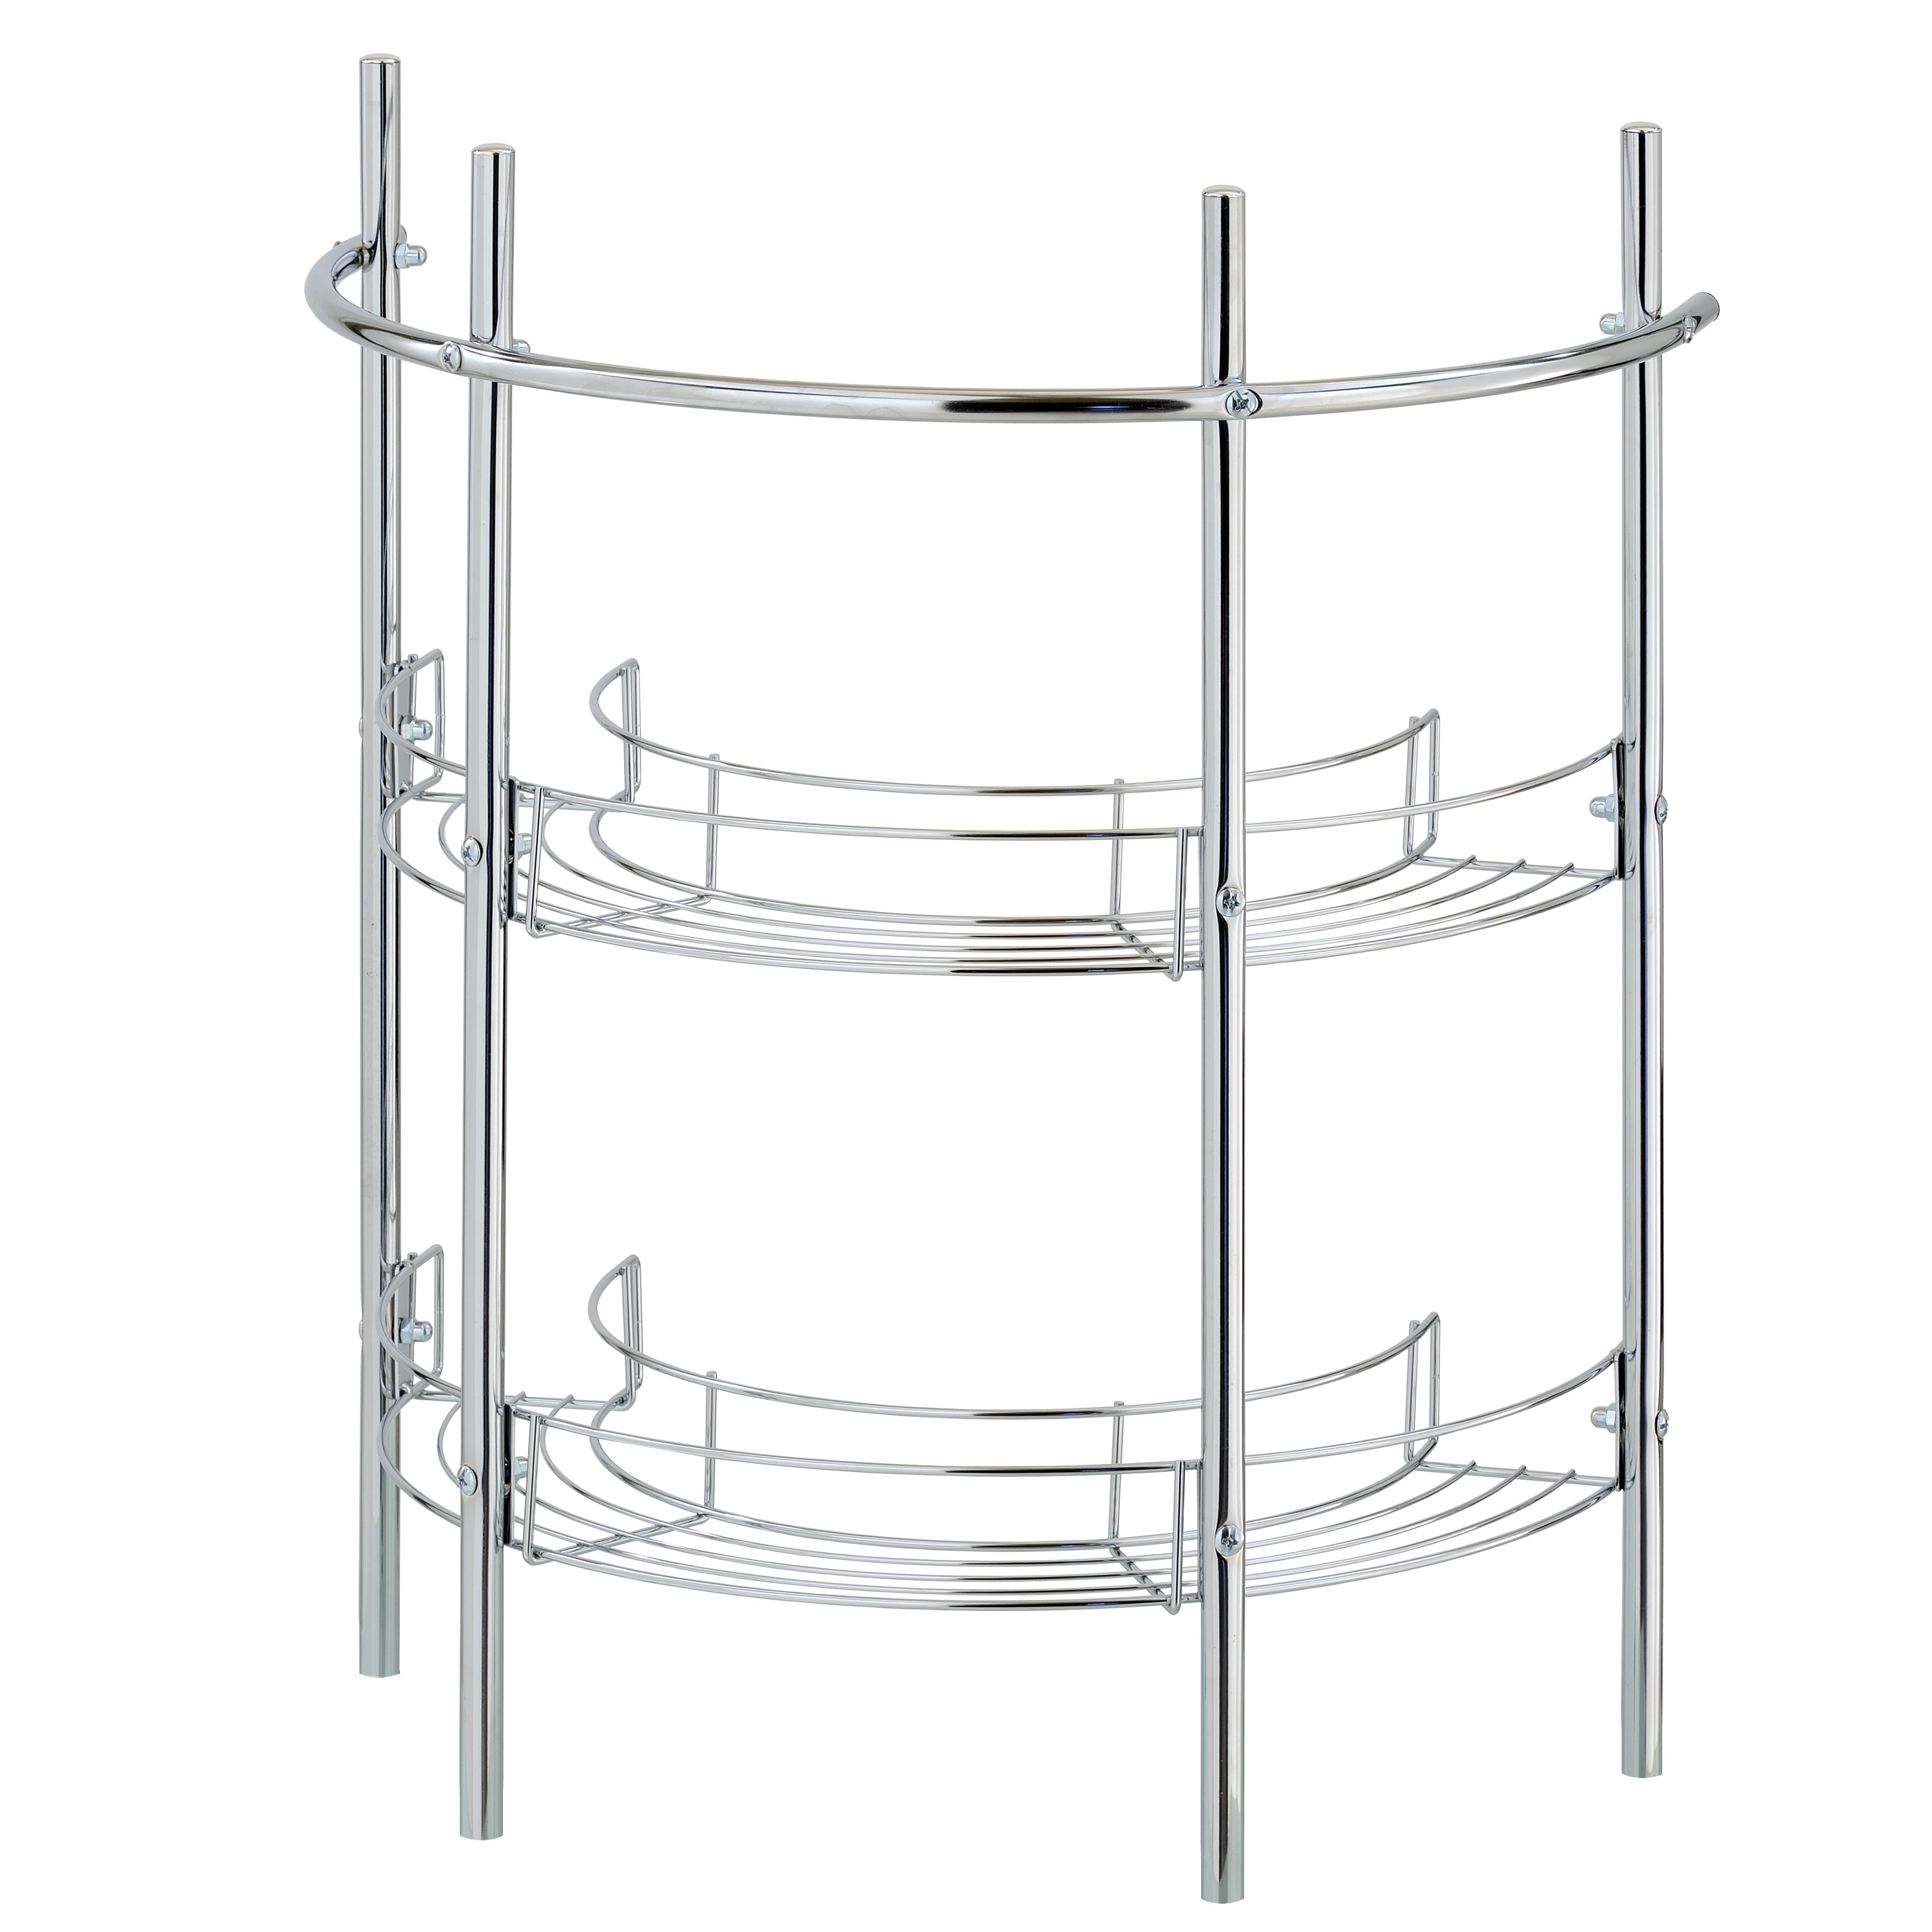 HOUSEHOLD ESSENTIALS Chrome and Faux Marble Sliding 2-Tier Steel Under Sink  Shelving Unit 12.25 in. W x 16 in. H x 21 in. D C53521-1 - The Home Depot